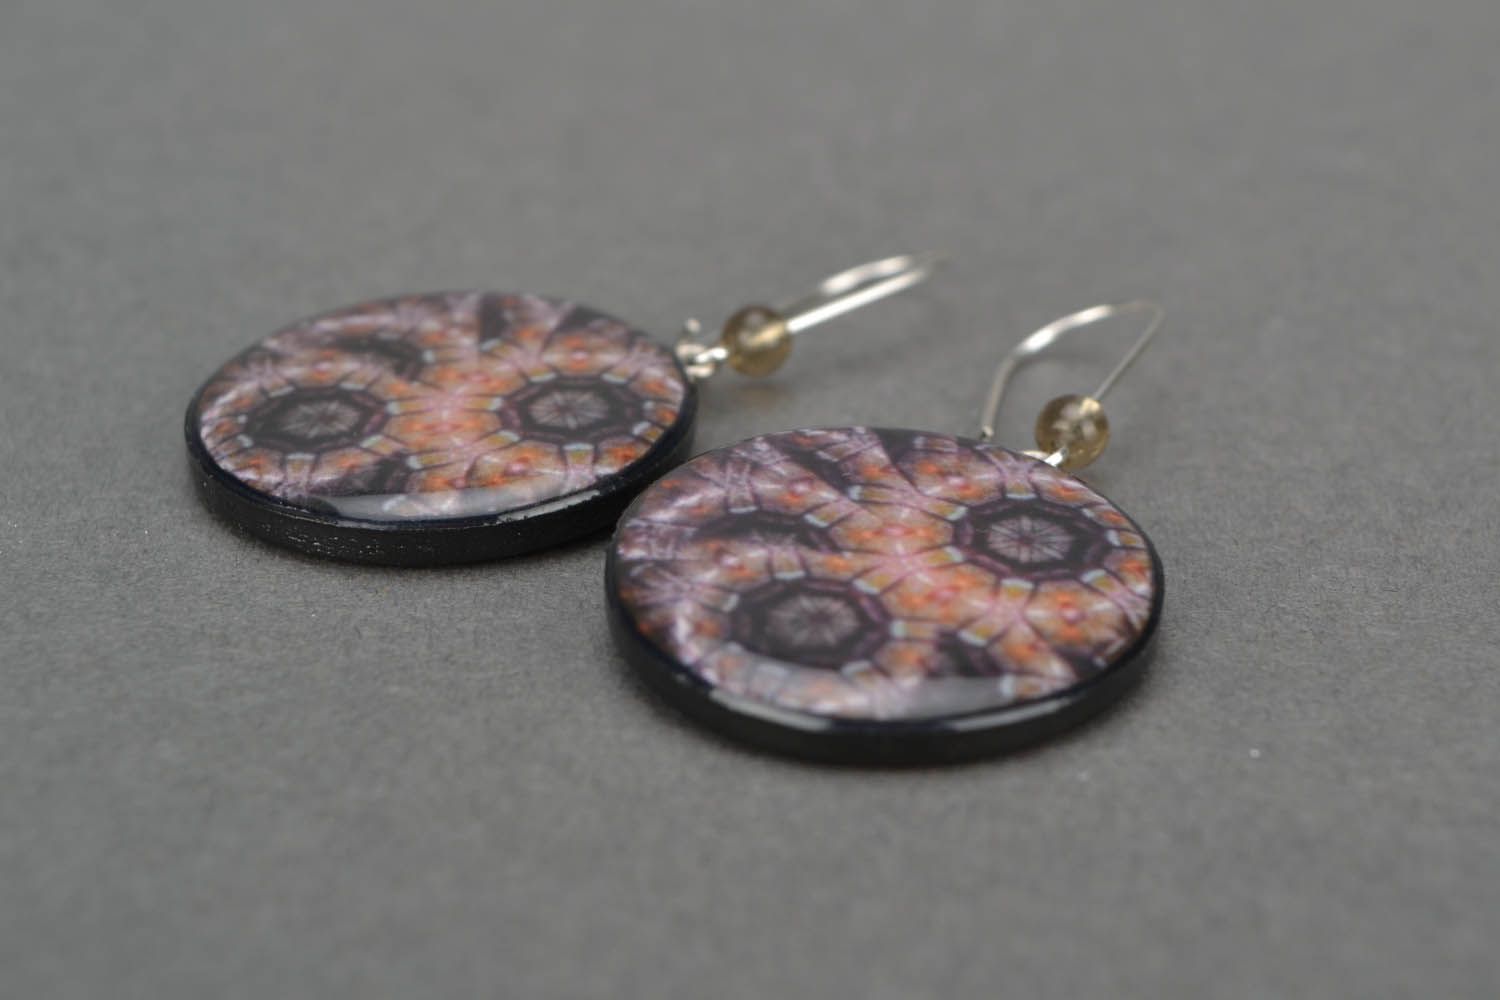 Round earrings made of polymer clay photo 5